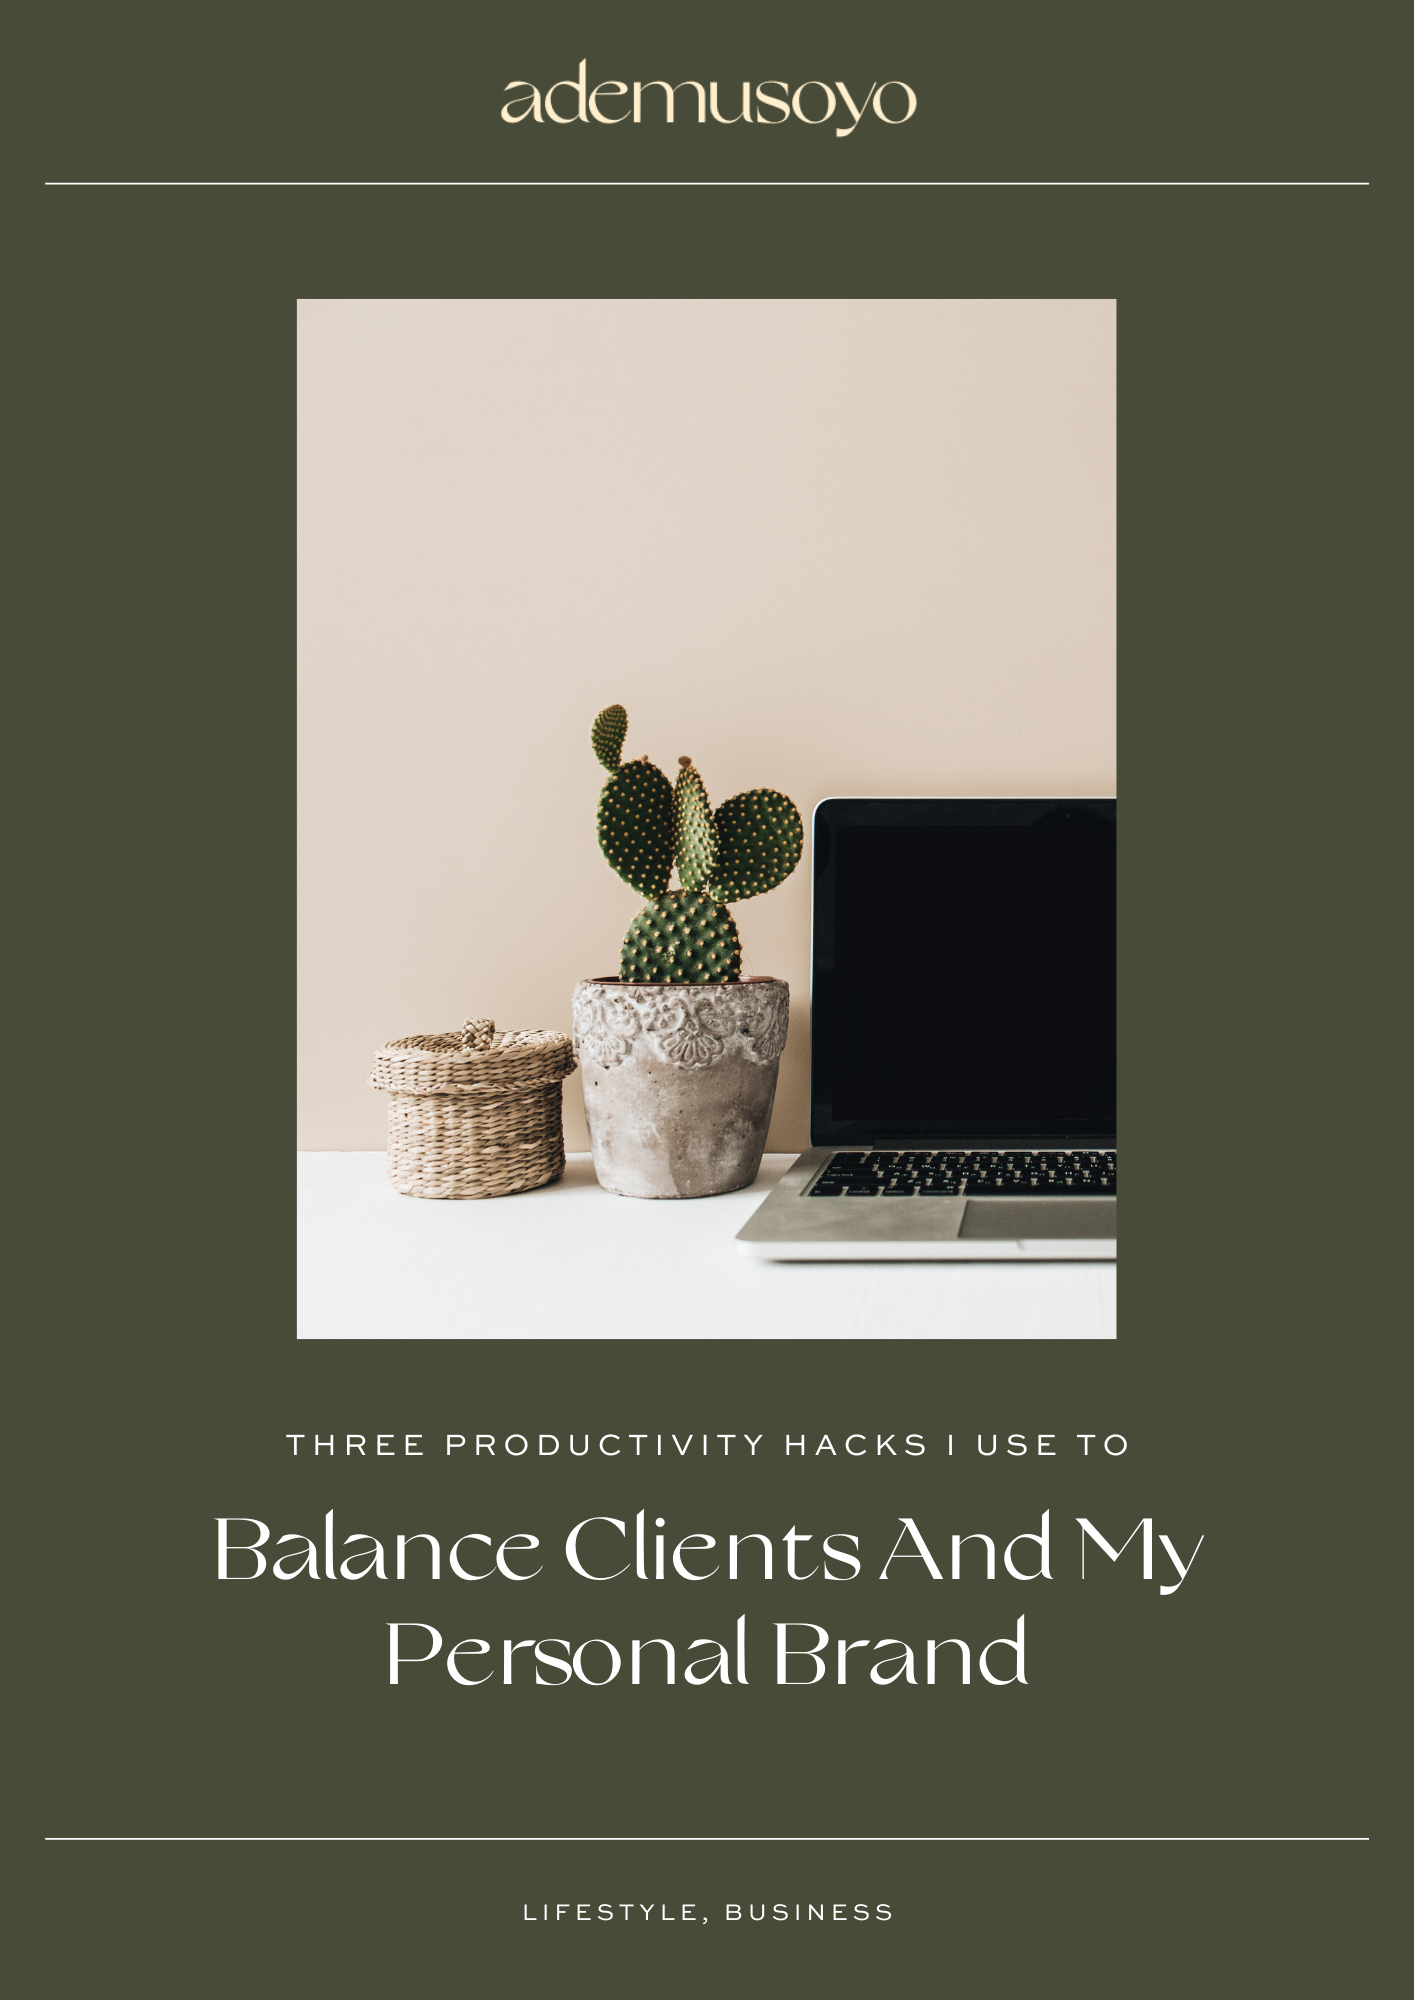 3 Productivity Hacks I Use To Balance Clients And My Personal Brand